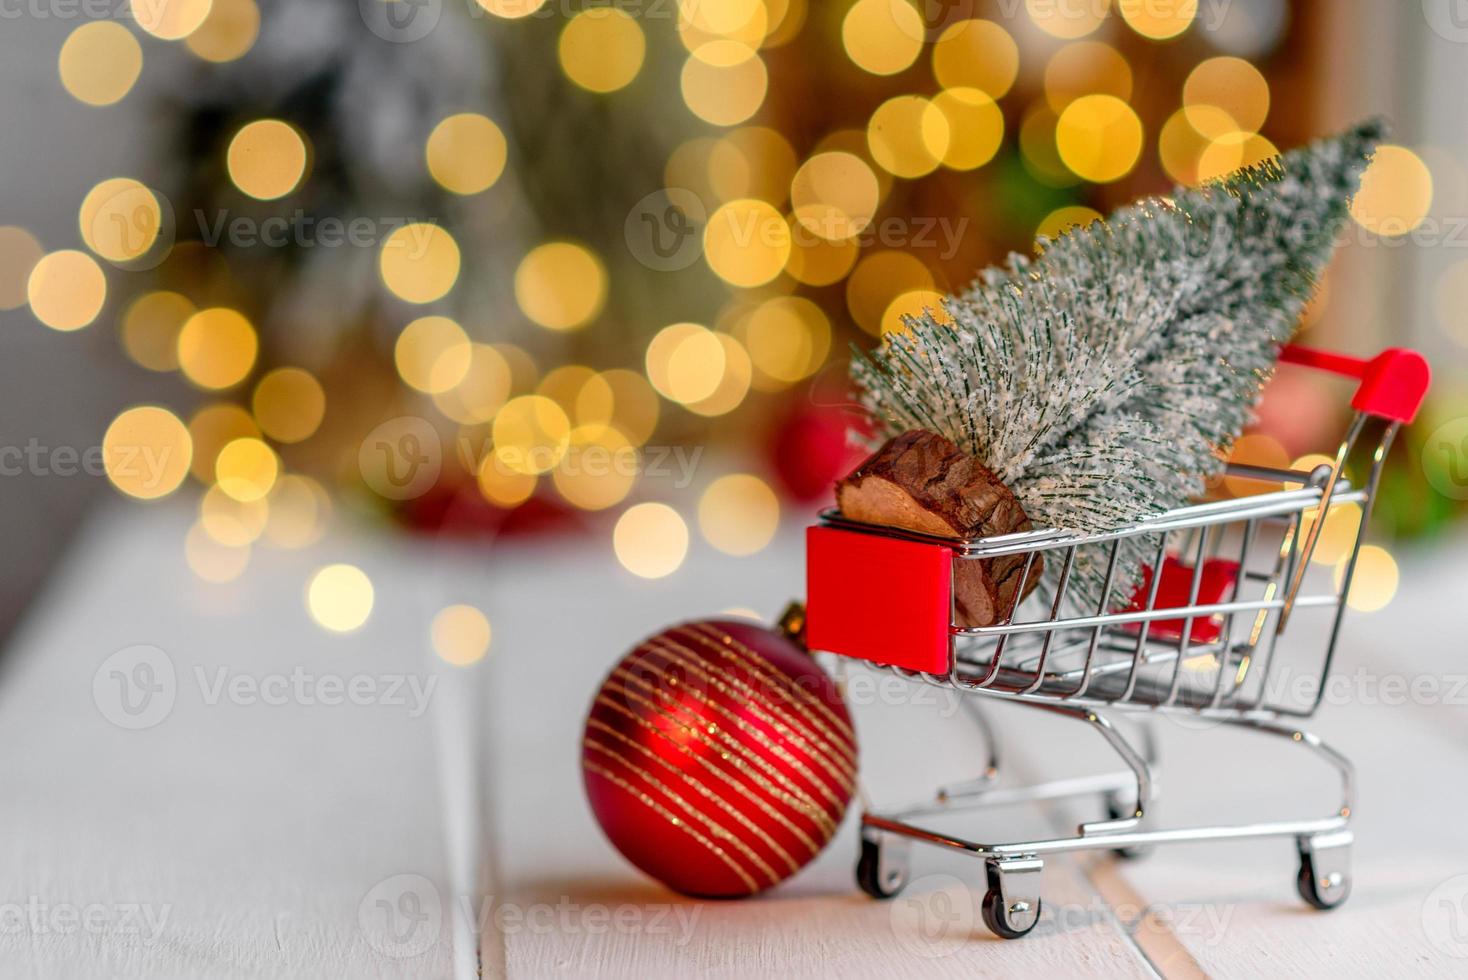 Shopping cart with Christmas gifts and presents. Christmas shopping photo